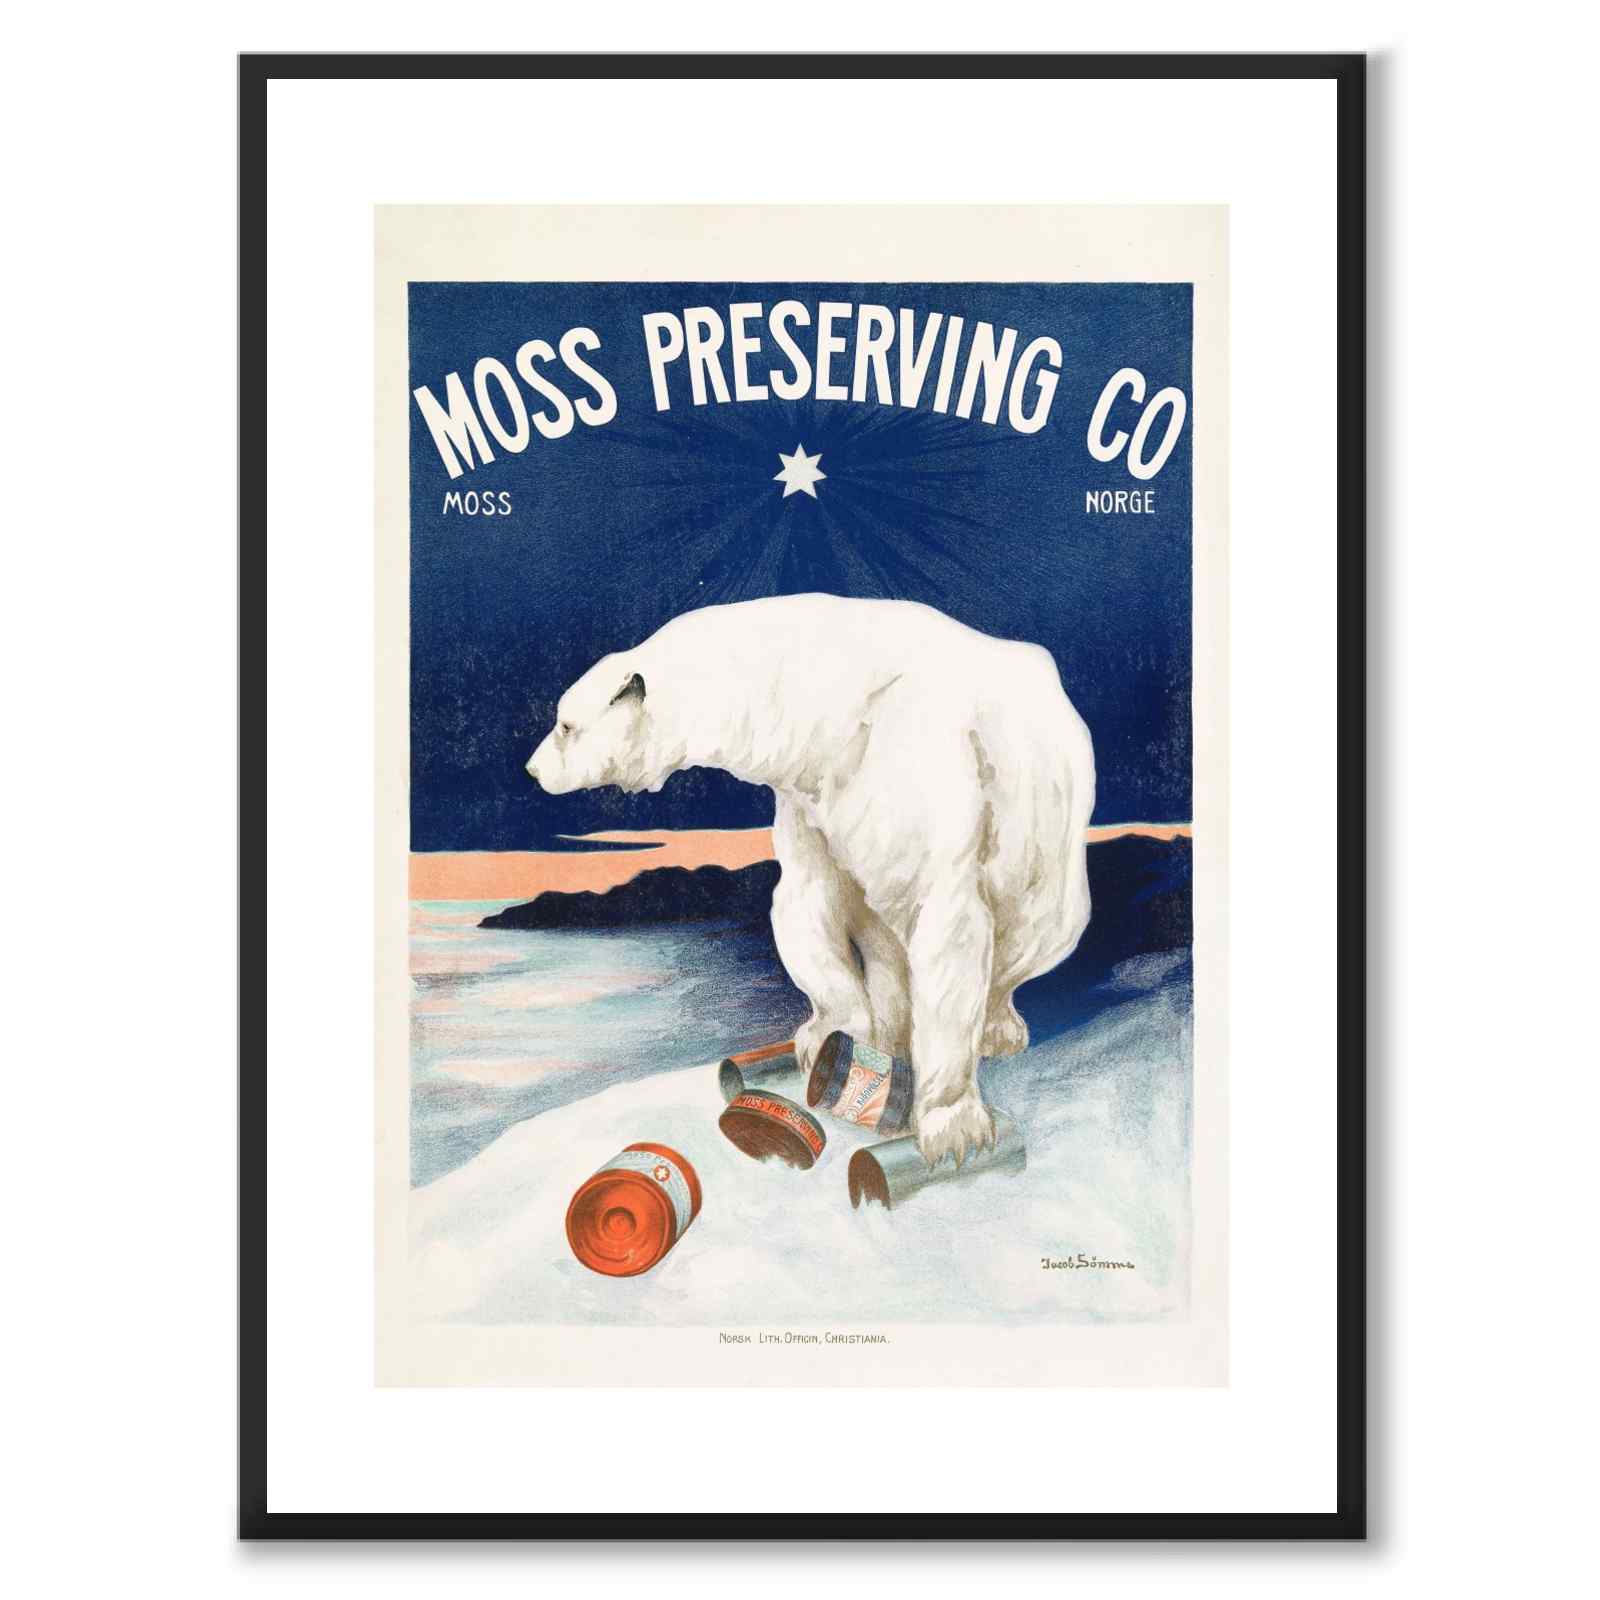 Moss Preserving Co